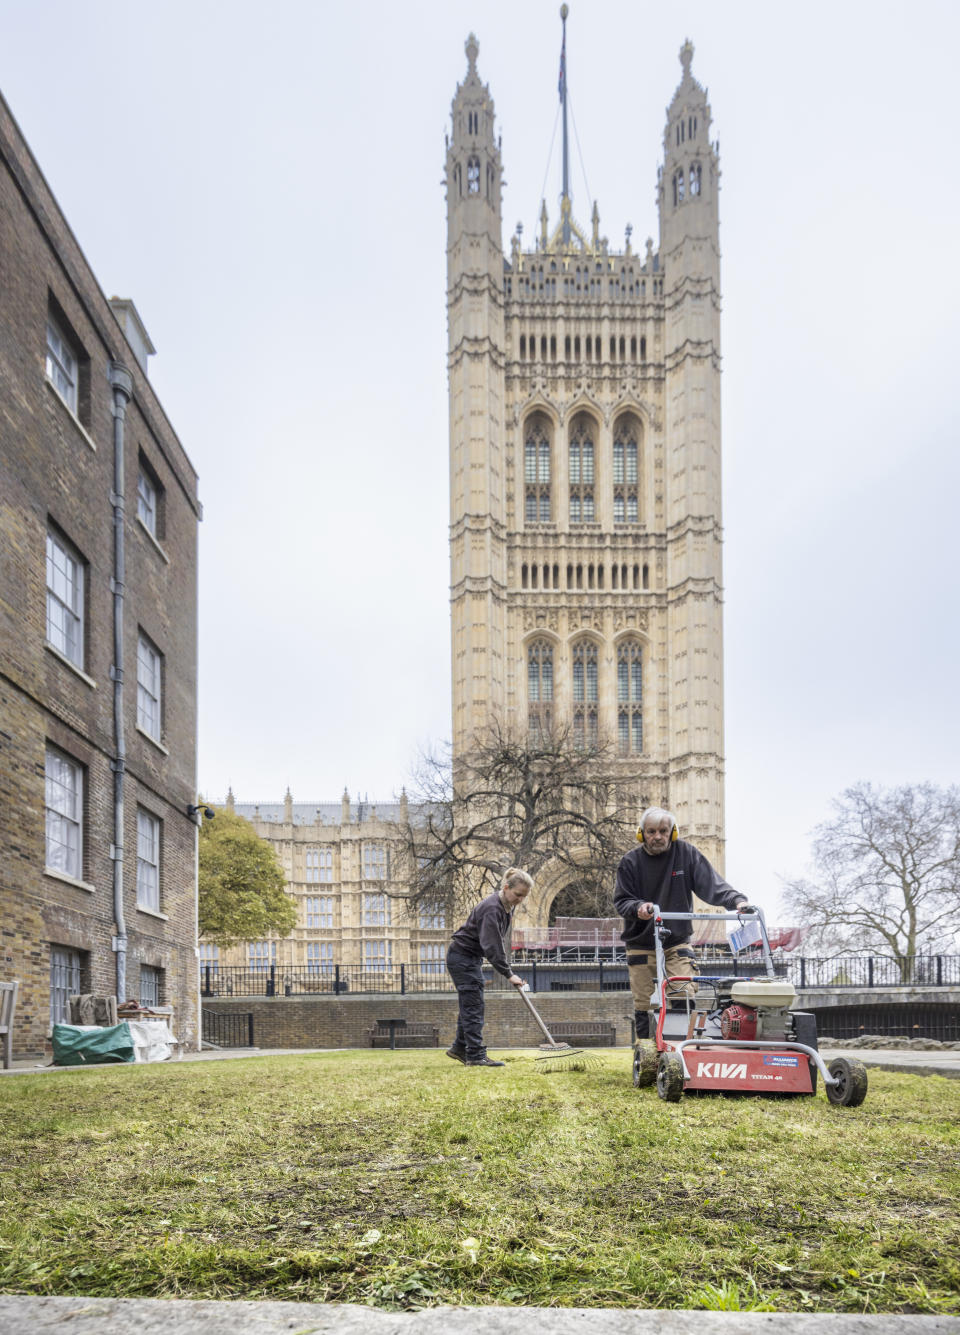 Gardeners prepare a lawn outside the Jewel Tower with the Palace of Westminster in the background (English Heritage/PA)